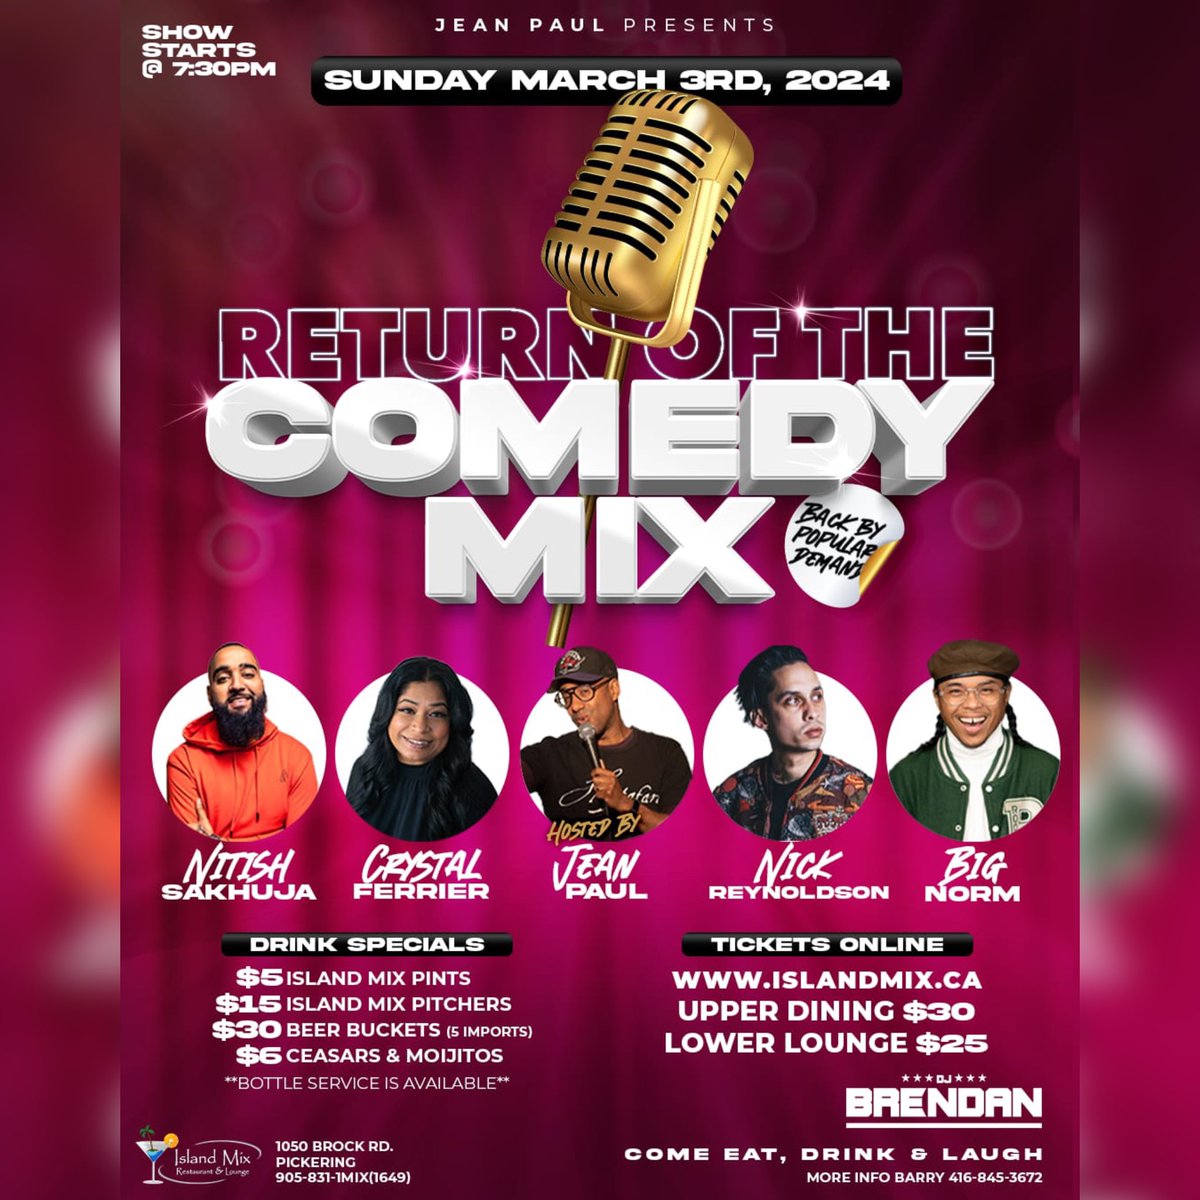 The Return of the ComedyMIX Sunday March 3rd inside Islandmix Restaurant and Lounge. Back with a solid line up of comics @MsFerrier @NickReynoldson @NitishSakhuja and Big Norm grab your tix and book your seats at link below islandmix.ca/event-details-…